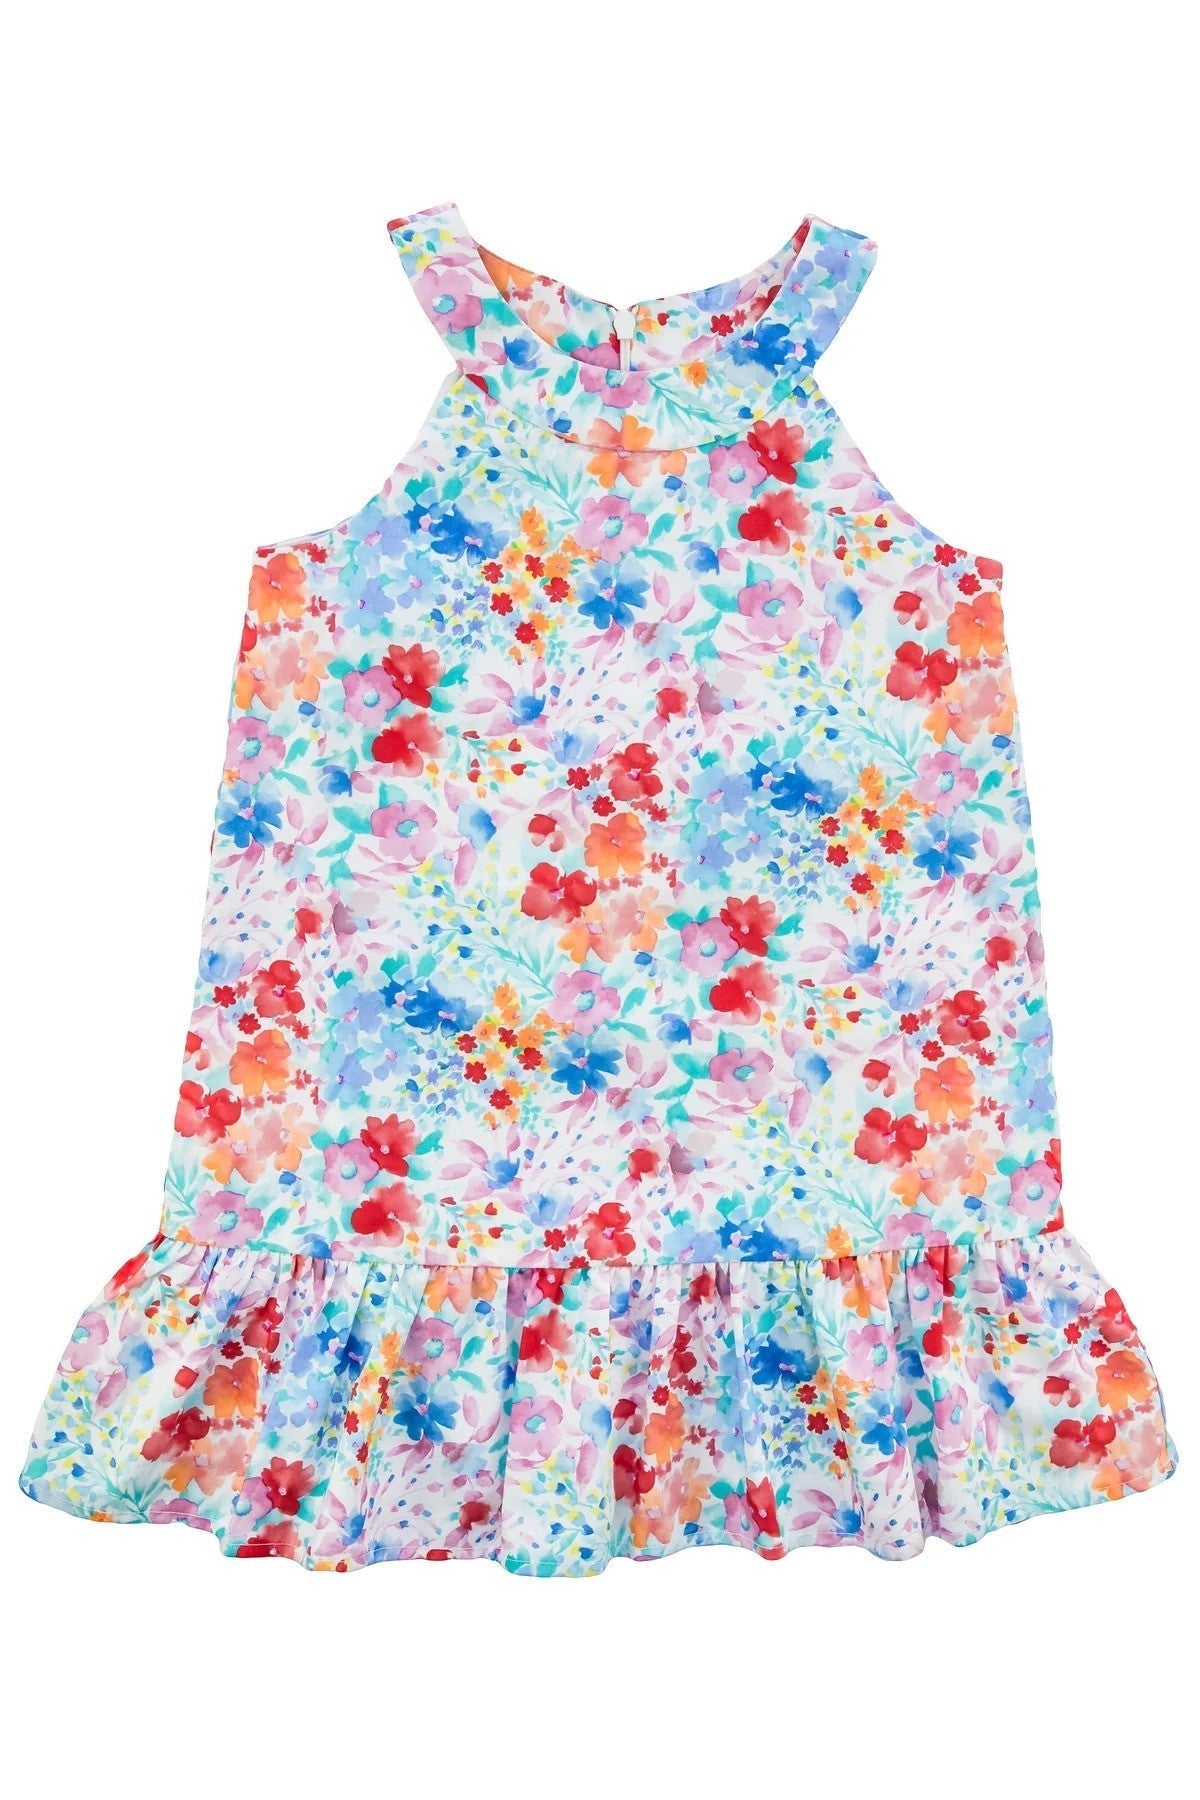 Florence Eiseman Apparel & Gifts Multi / 7 Florence Eiseman Floral Dress With Shirred Skirt